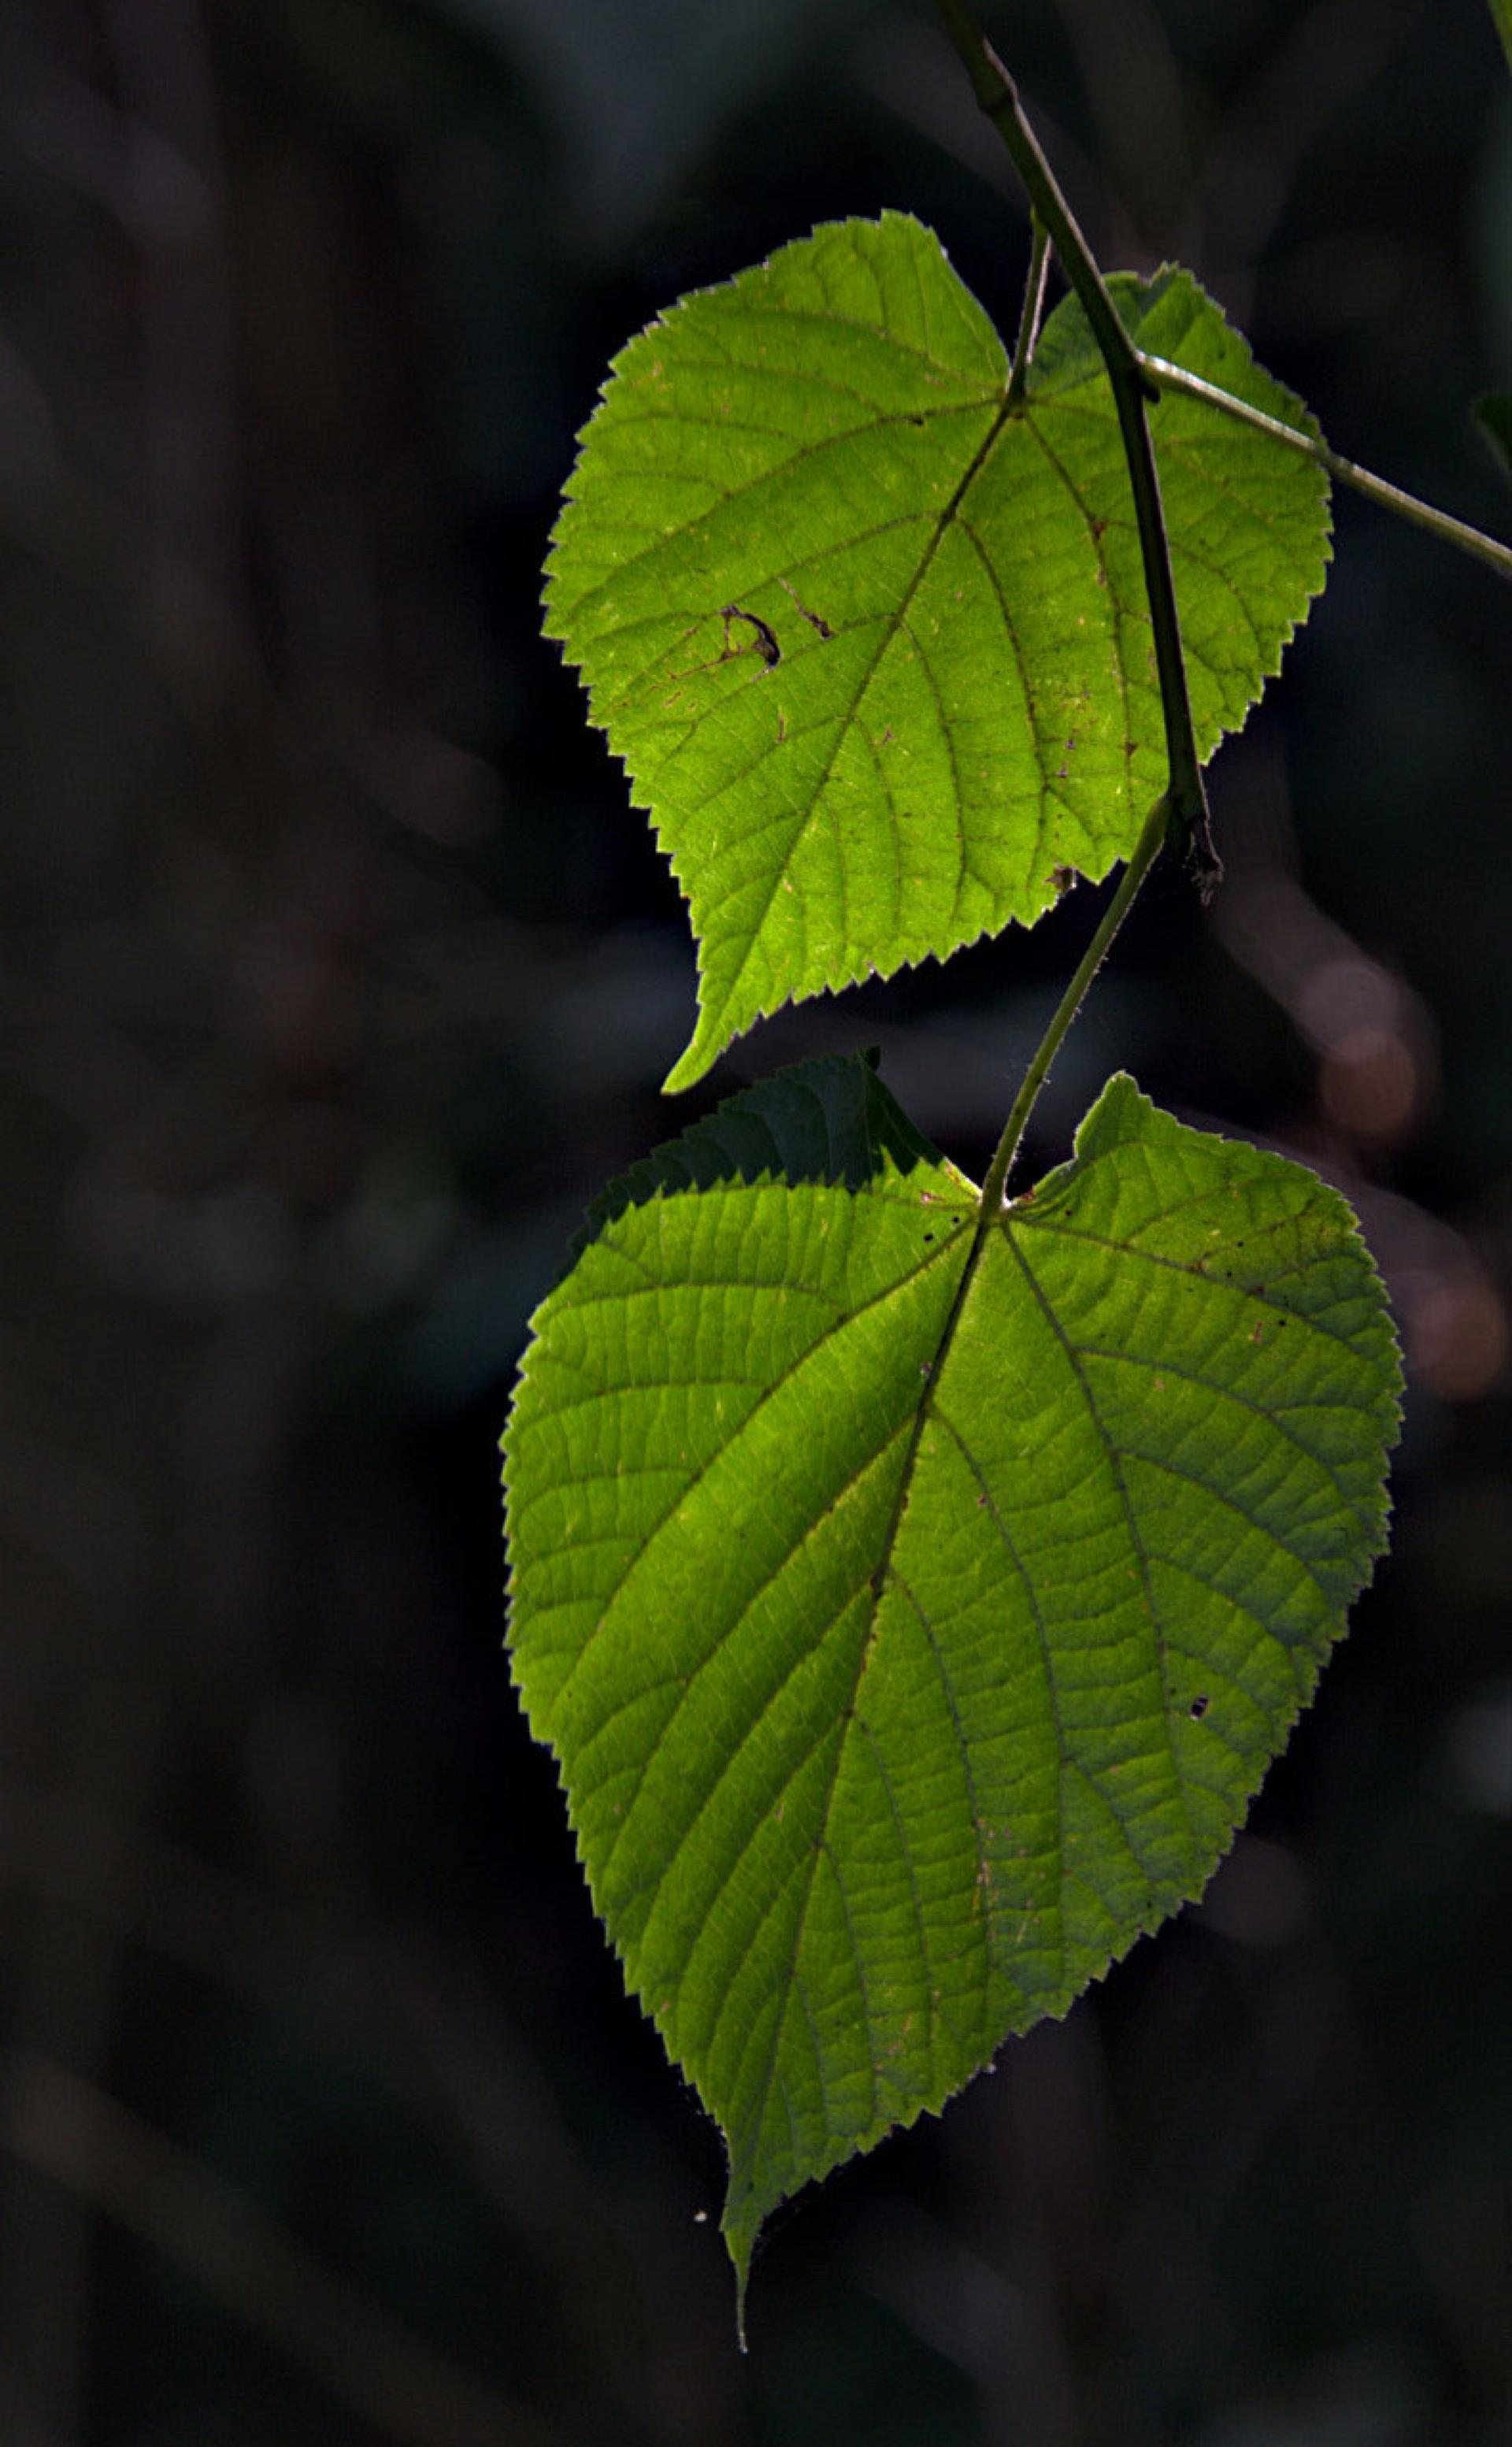 Two small green leaves are shown while the rest of the photograph is dark.